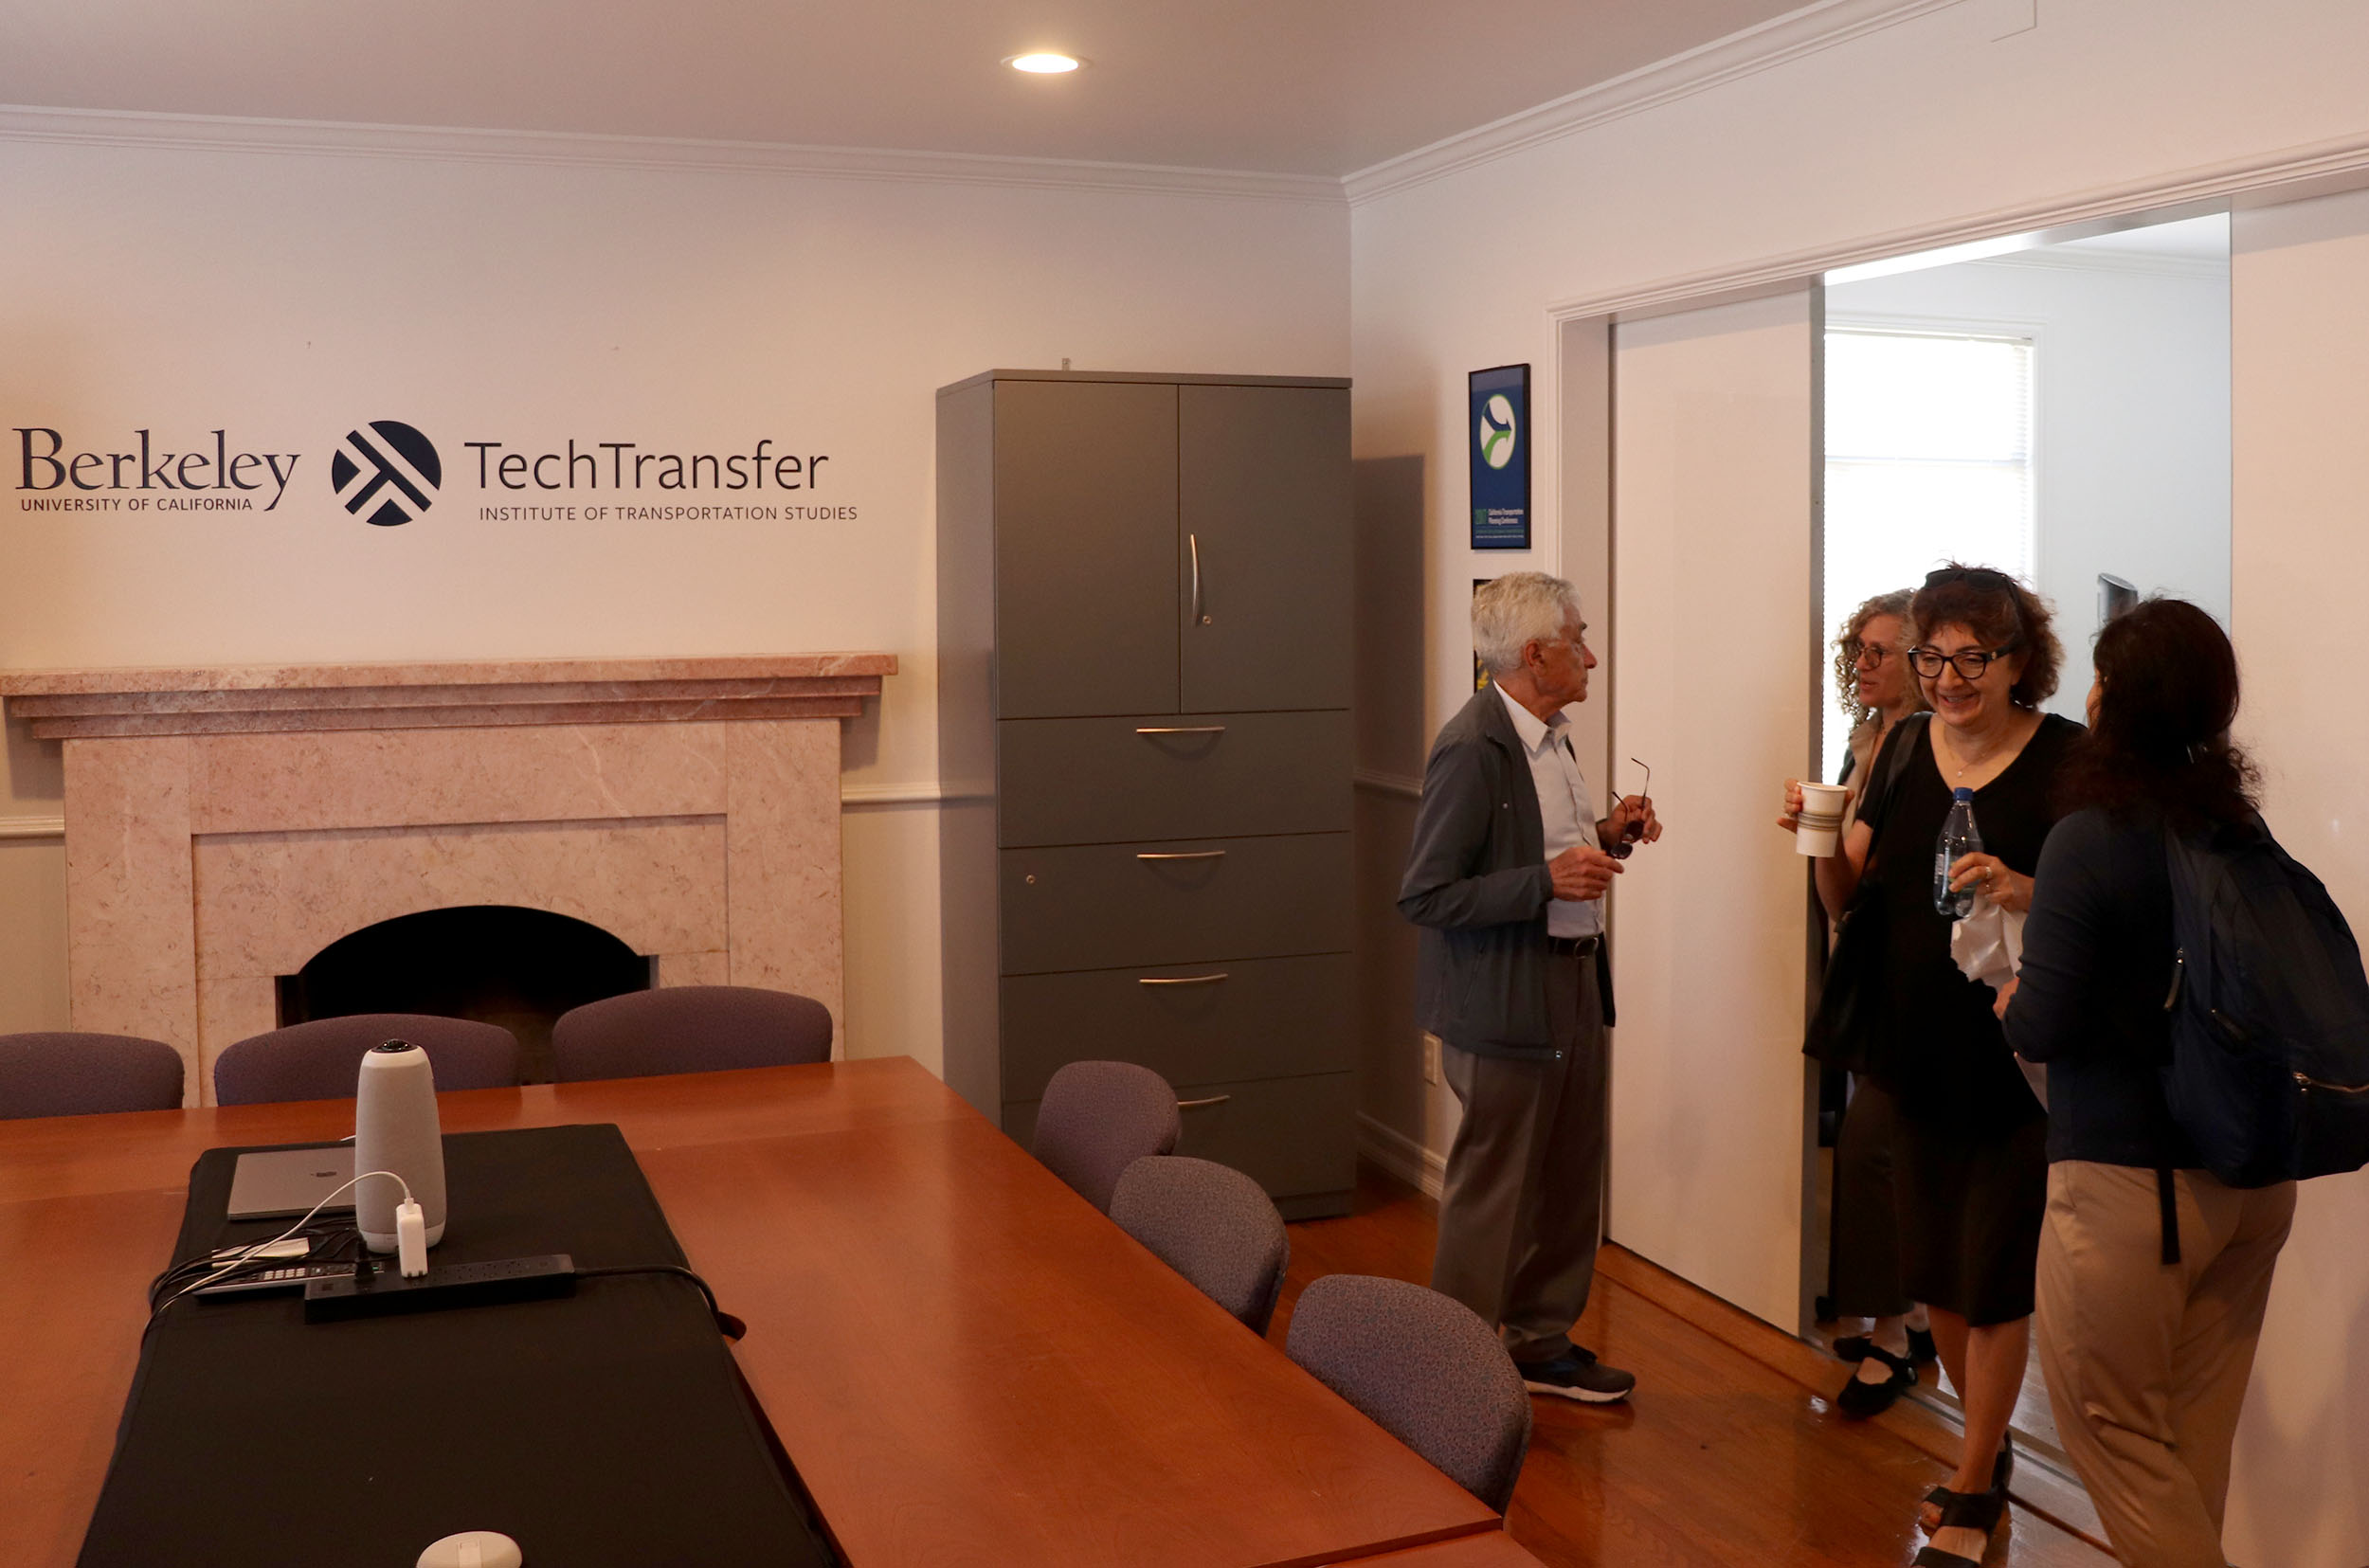 TechTransfer staff showed ITS Berkeley and Center staff around their new office building at the Richmond Field Station